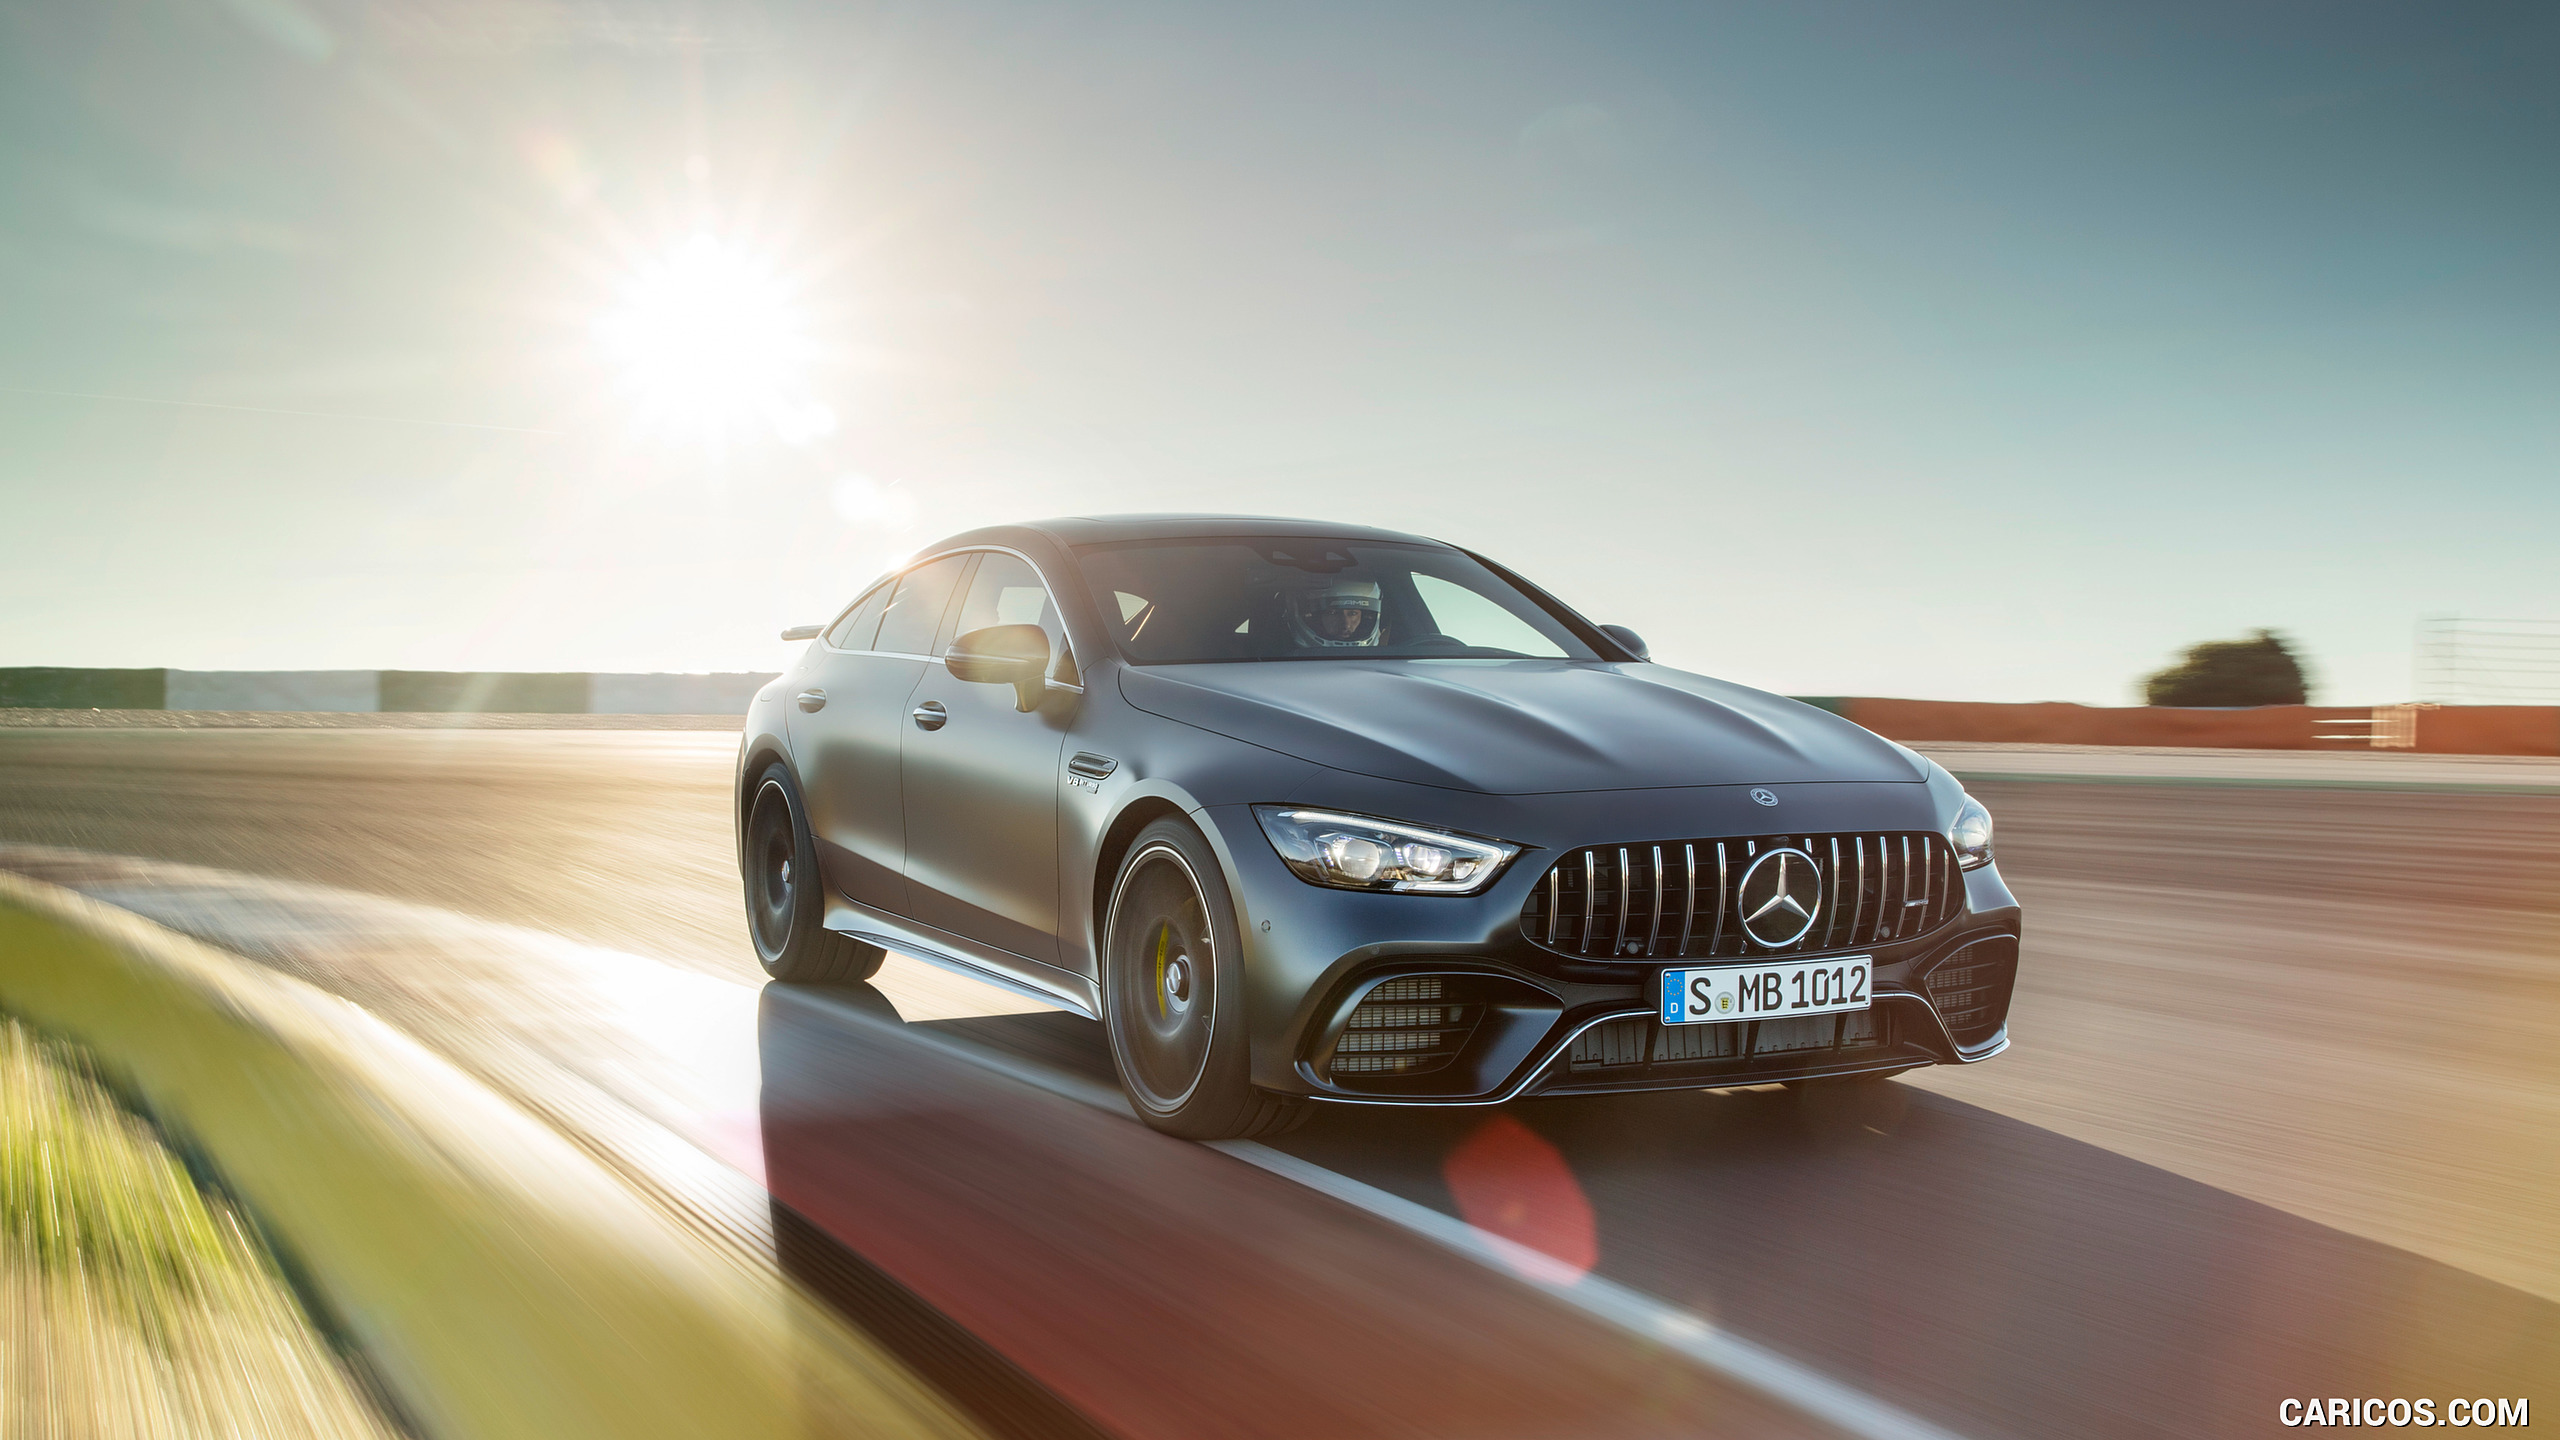 2019 Mercedes-AMG GT 63 S 4MATIC+ 4-Door Coupe (Color: Graphite Grey Magno) - Front Three-Quarter, #10 of 427